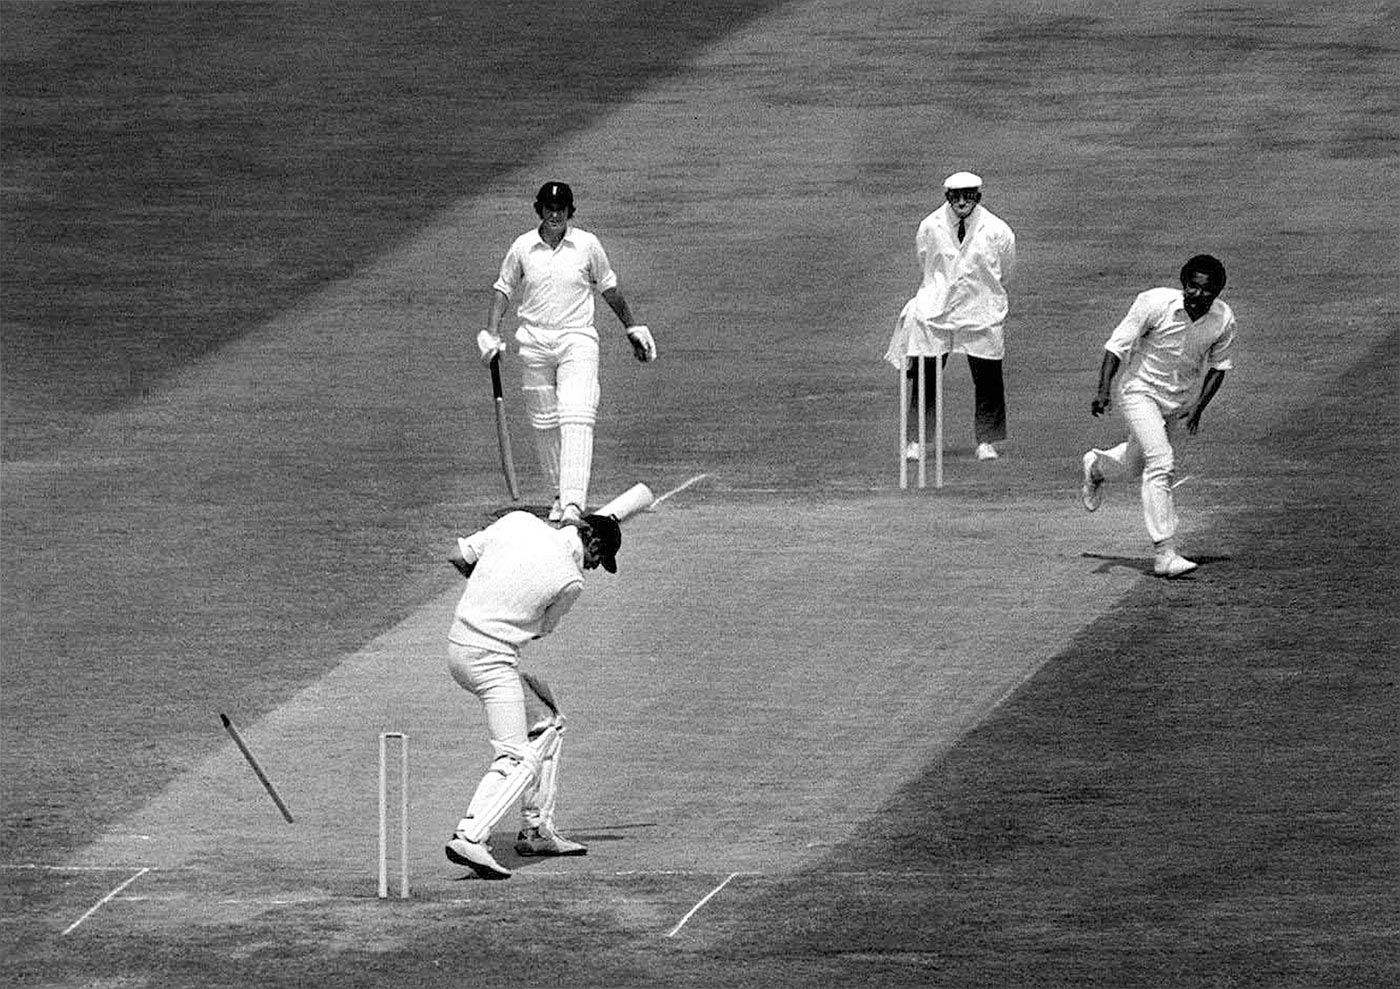 Tony Greig is bowled for a duck by Andy Roberts at Trent Bridge